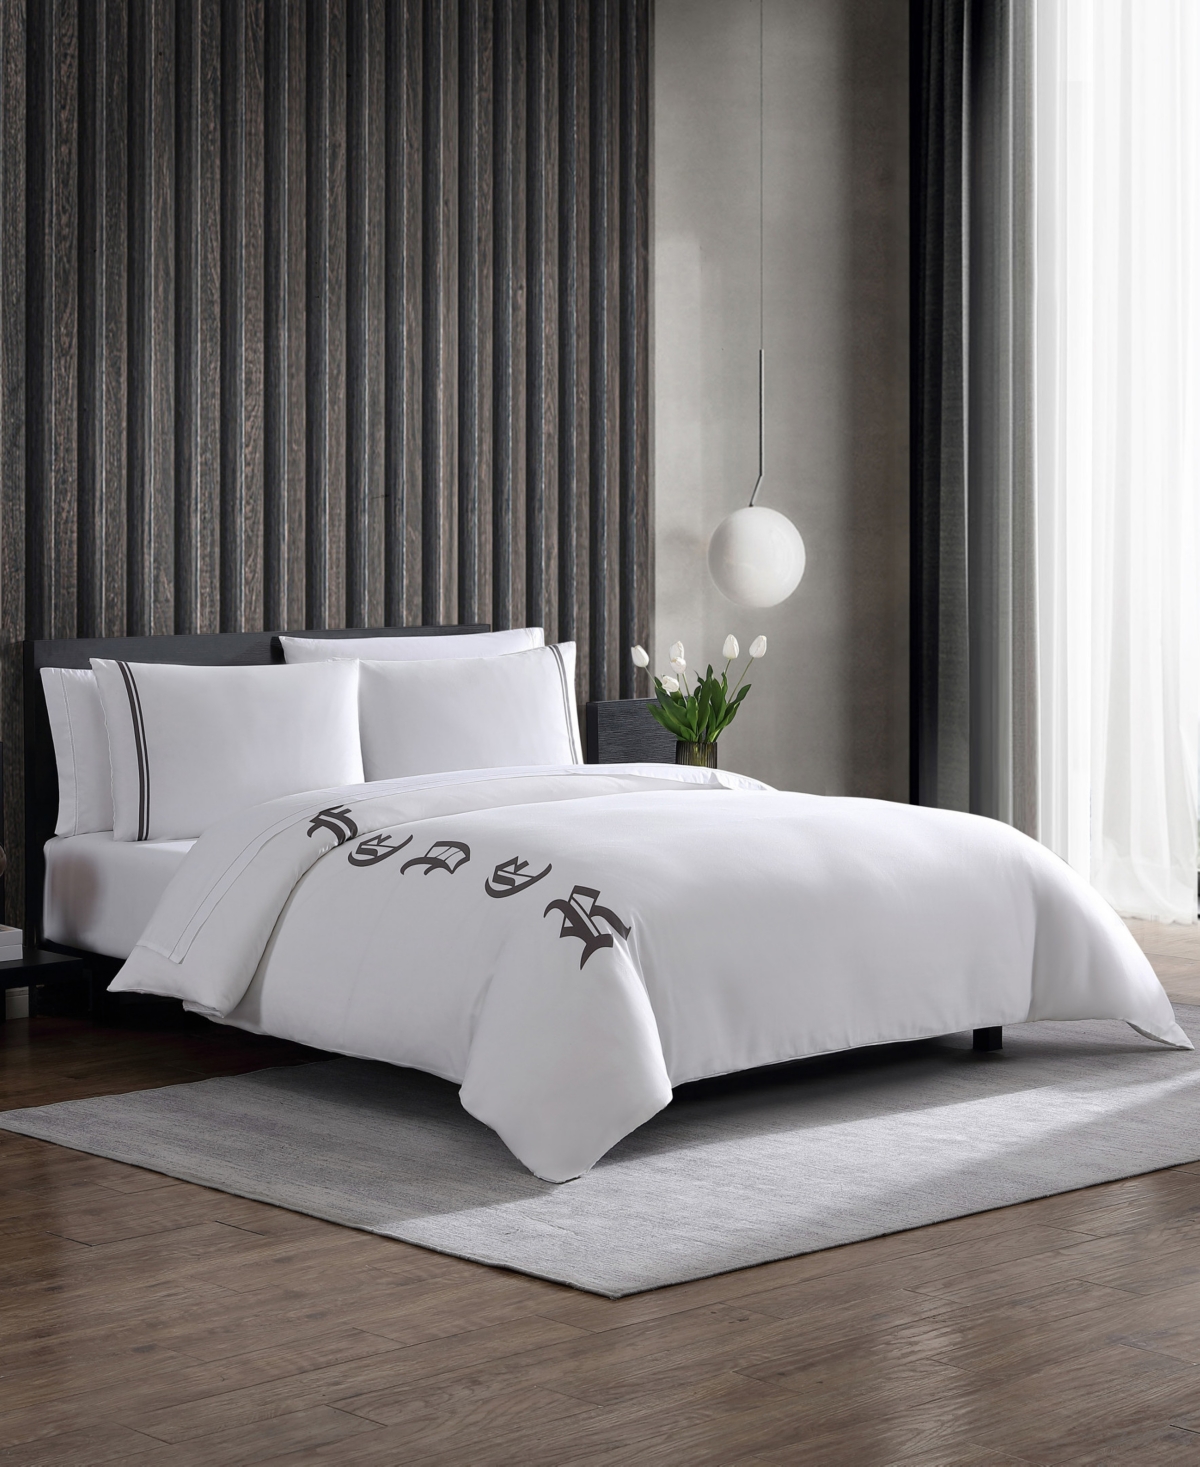 Vera Wang Closeout!  3 Piece Forever Duvet Cover Set, King Bedding In White